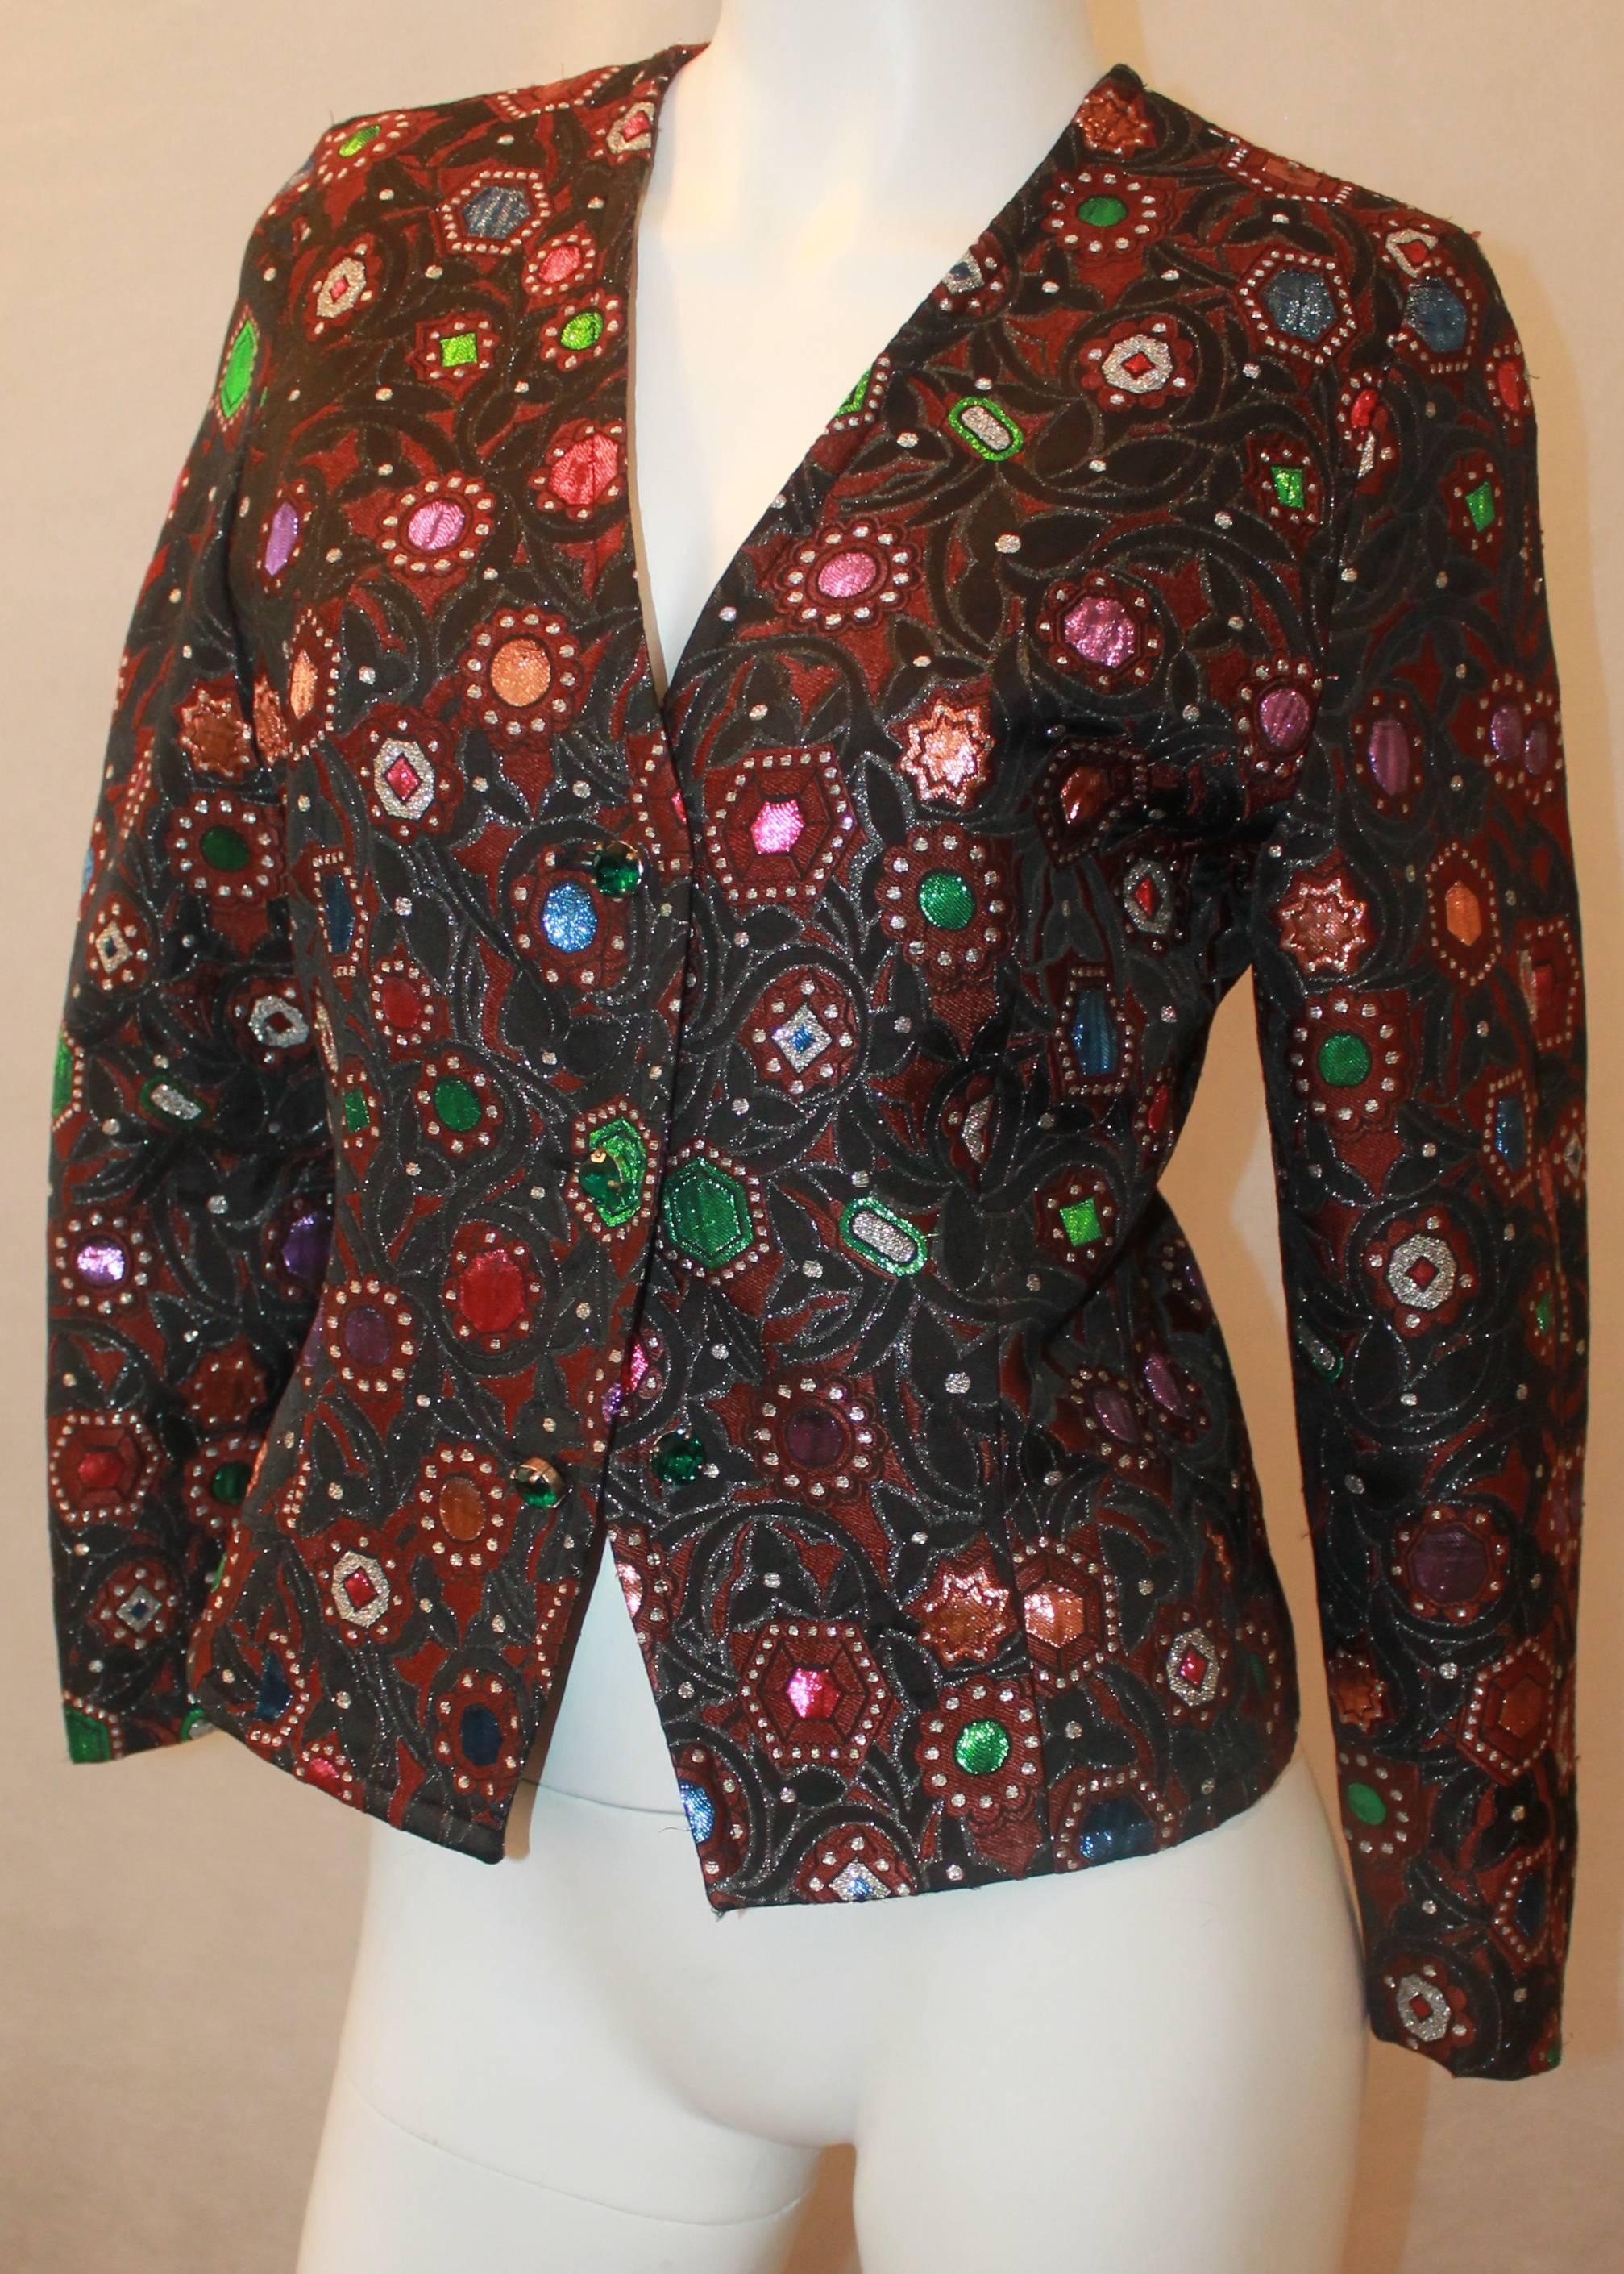 Guy Laroche Brown, Black, and Multi Abstract Brocade Jacket - 4 - Circa 80/90's.  This unique vintage jacket is in good condition with only some pulling on the tinsel in the front areas.  It features a black and brown abstract background designer